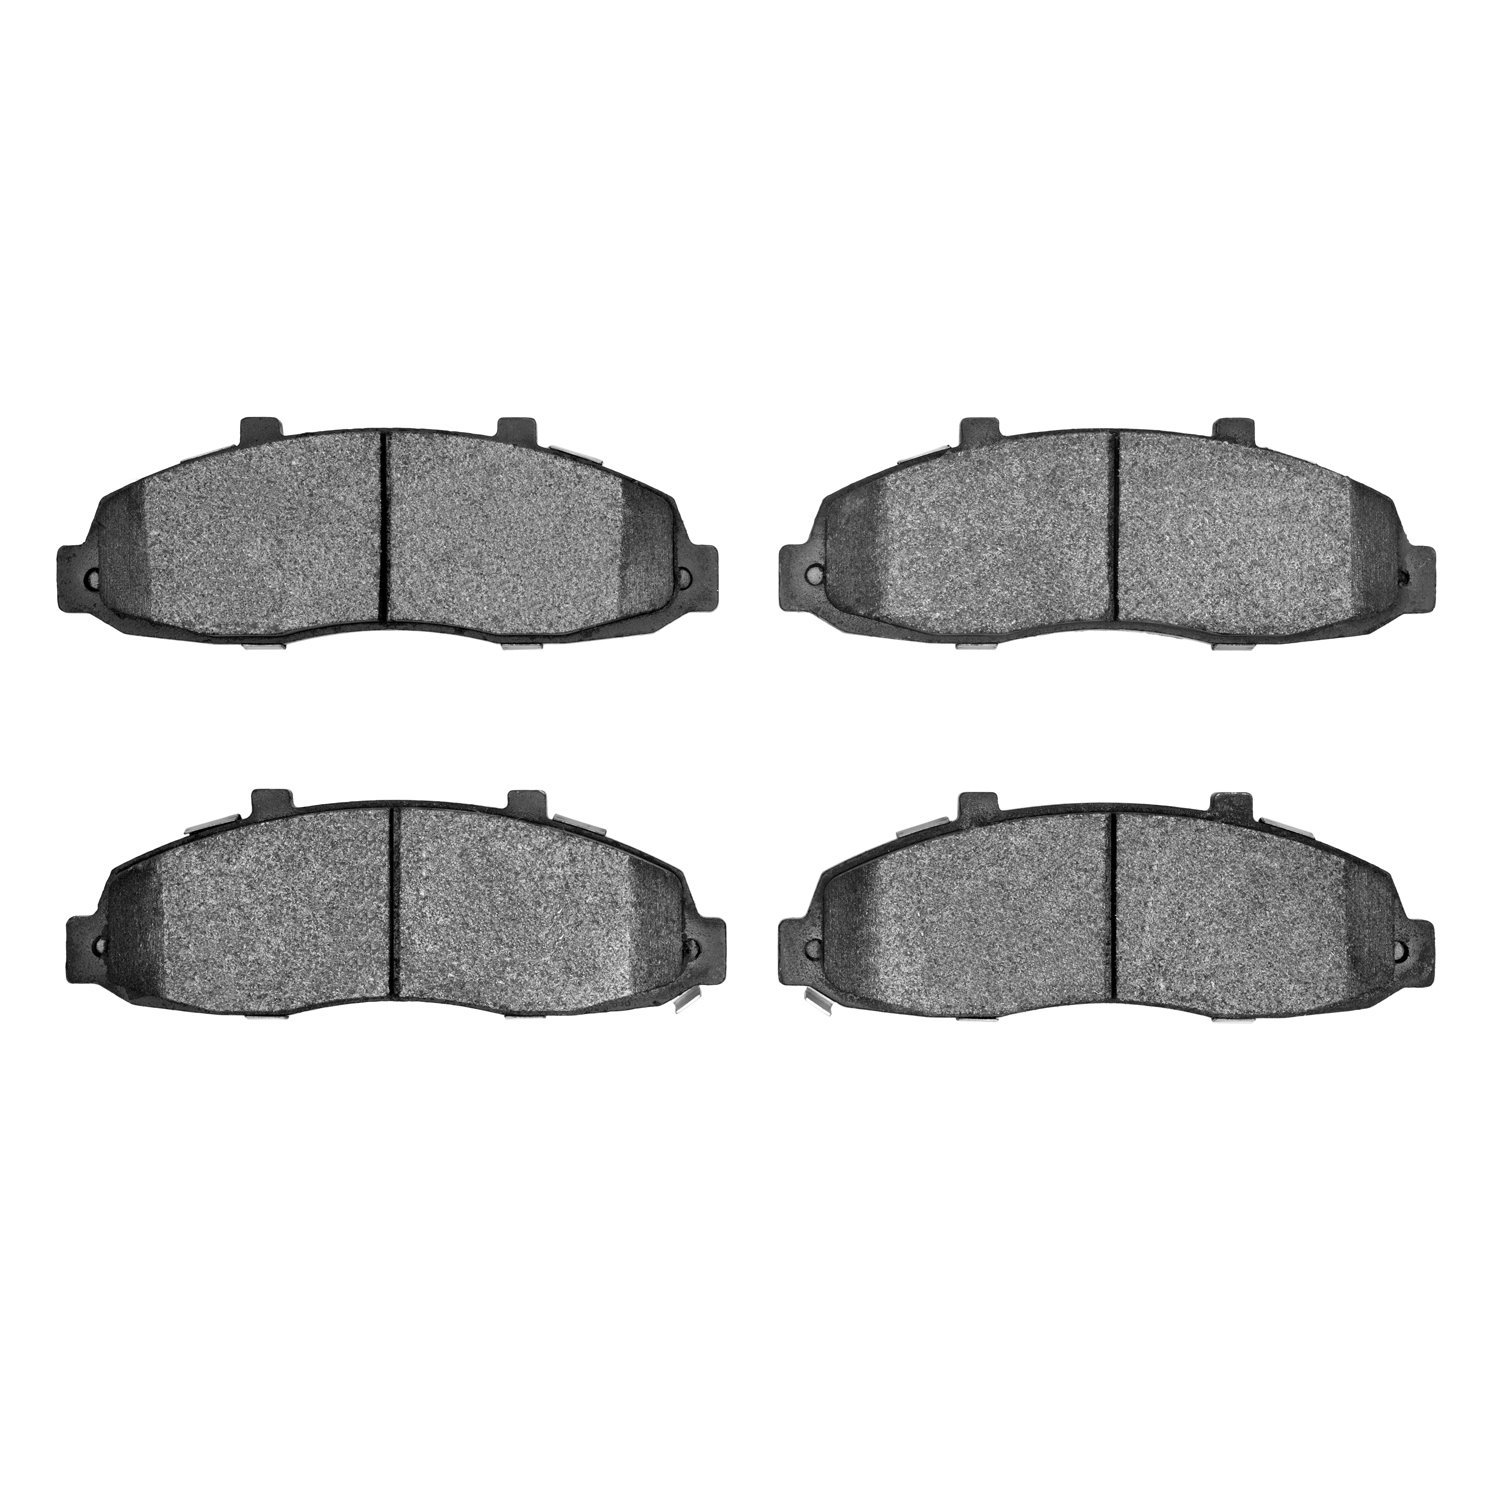 1400-0679-00 Ultimate-Duty Brake Pads Kit, 1997-2004 Ford/Lincoln/Mercury/Mazda, Position: Front